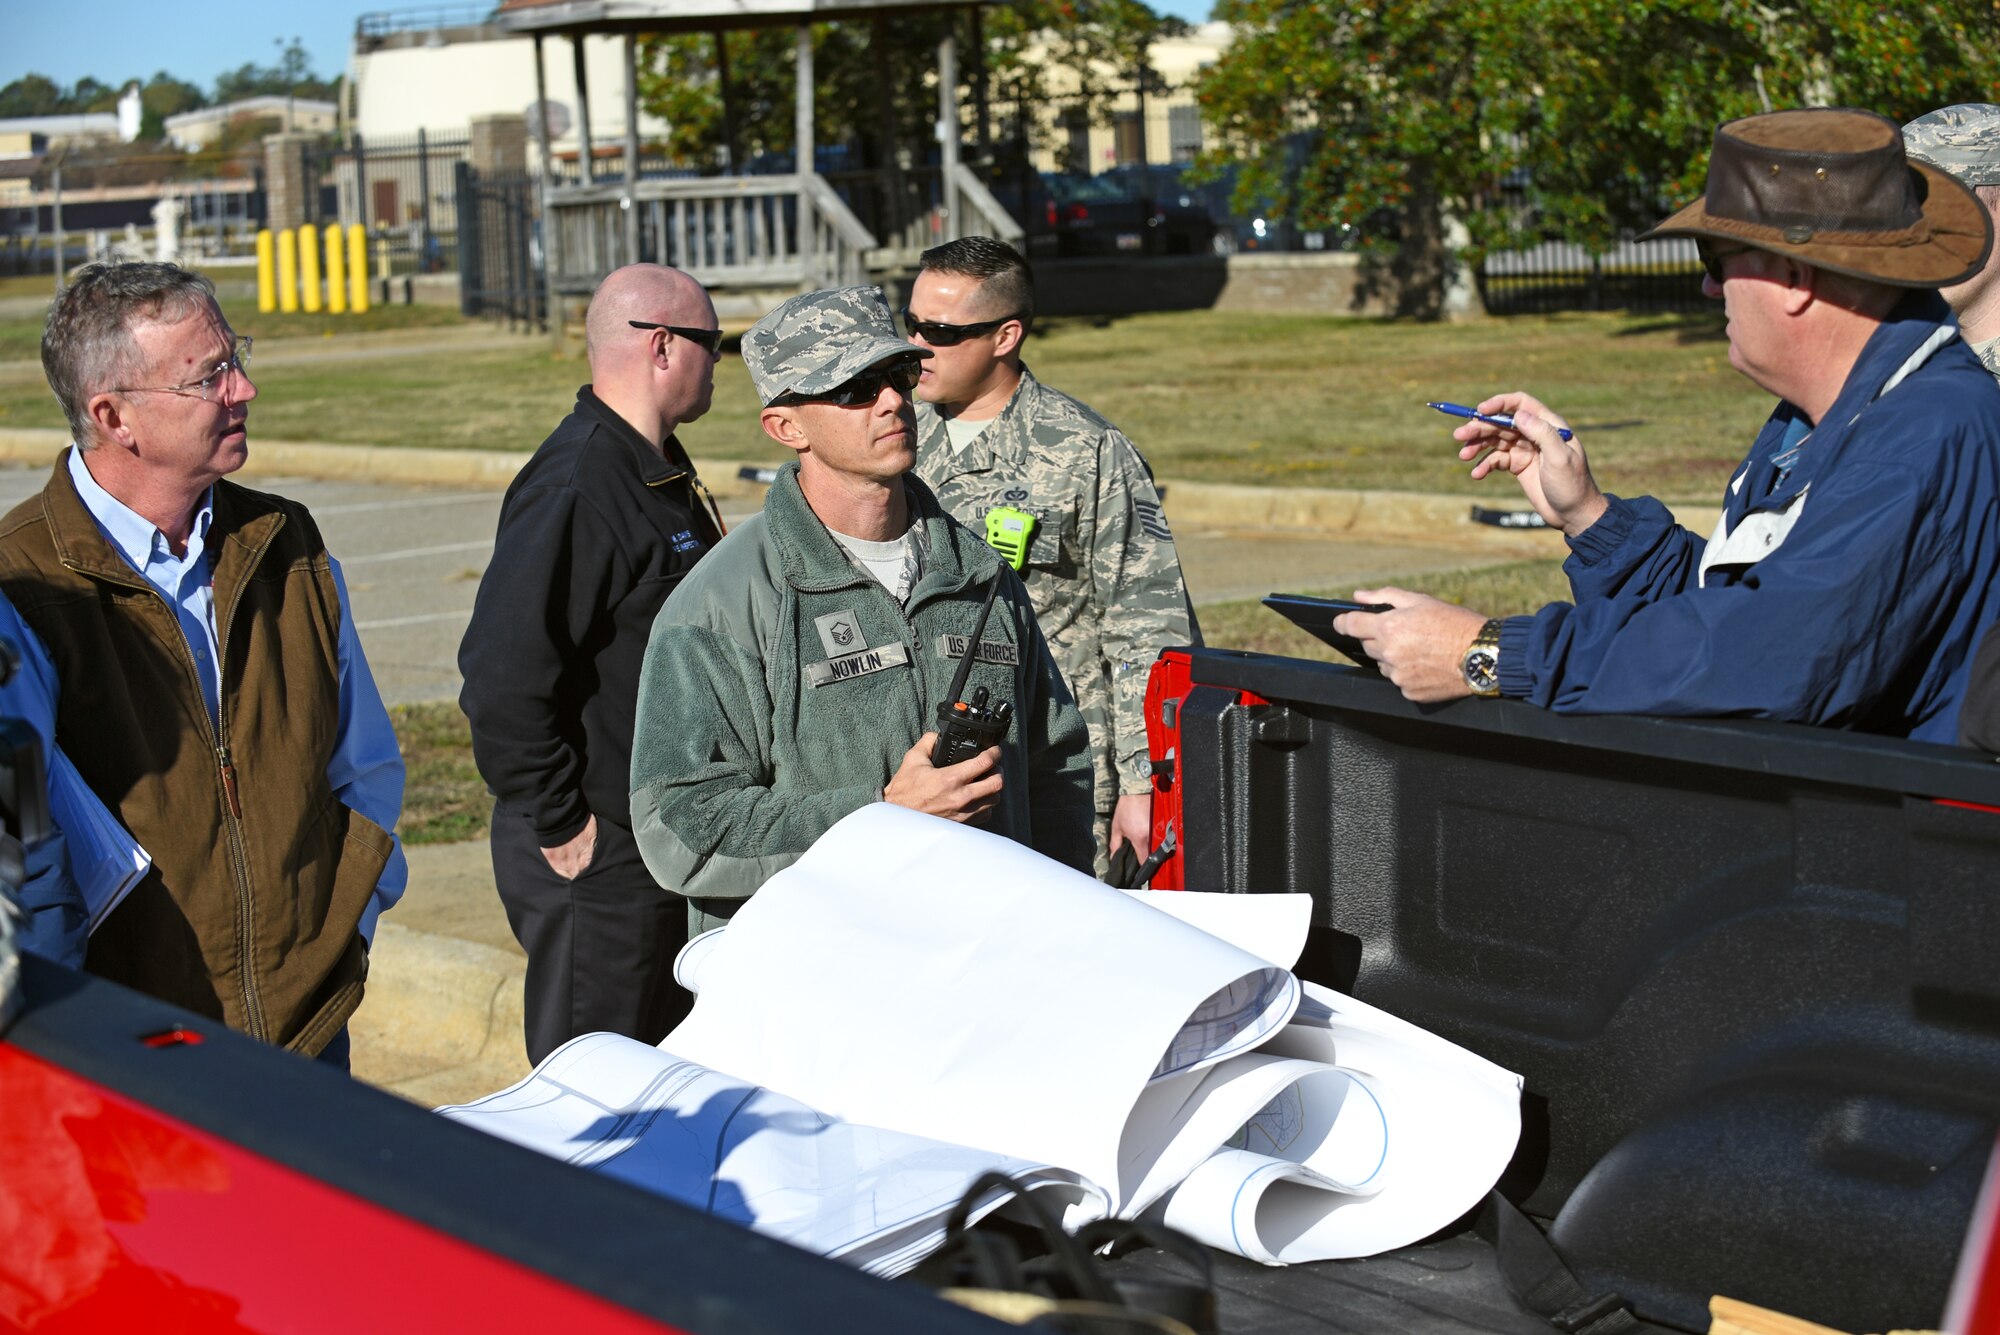 Fuel spill major accident response exercise participants discuss the simulated scenario at Shaw Air Force Base, South Carolina, Nov. 17, 2017.